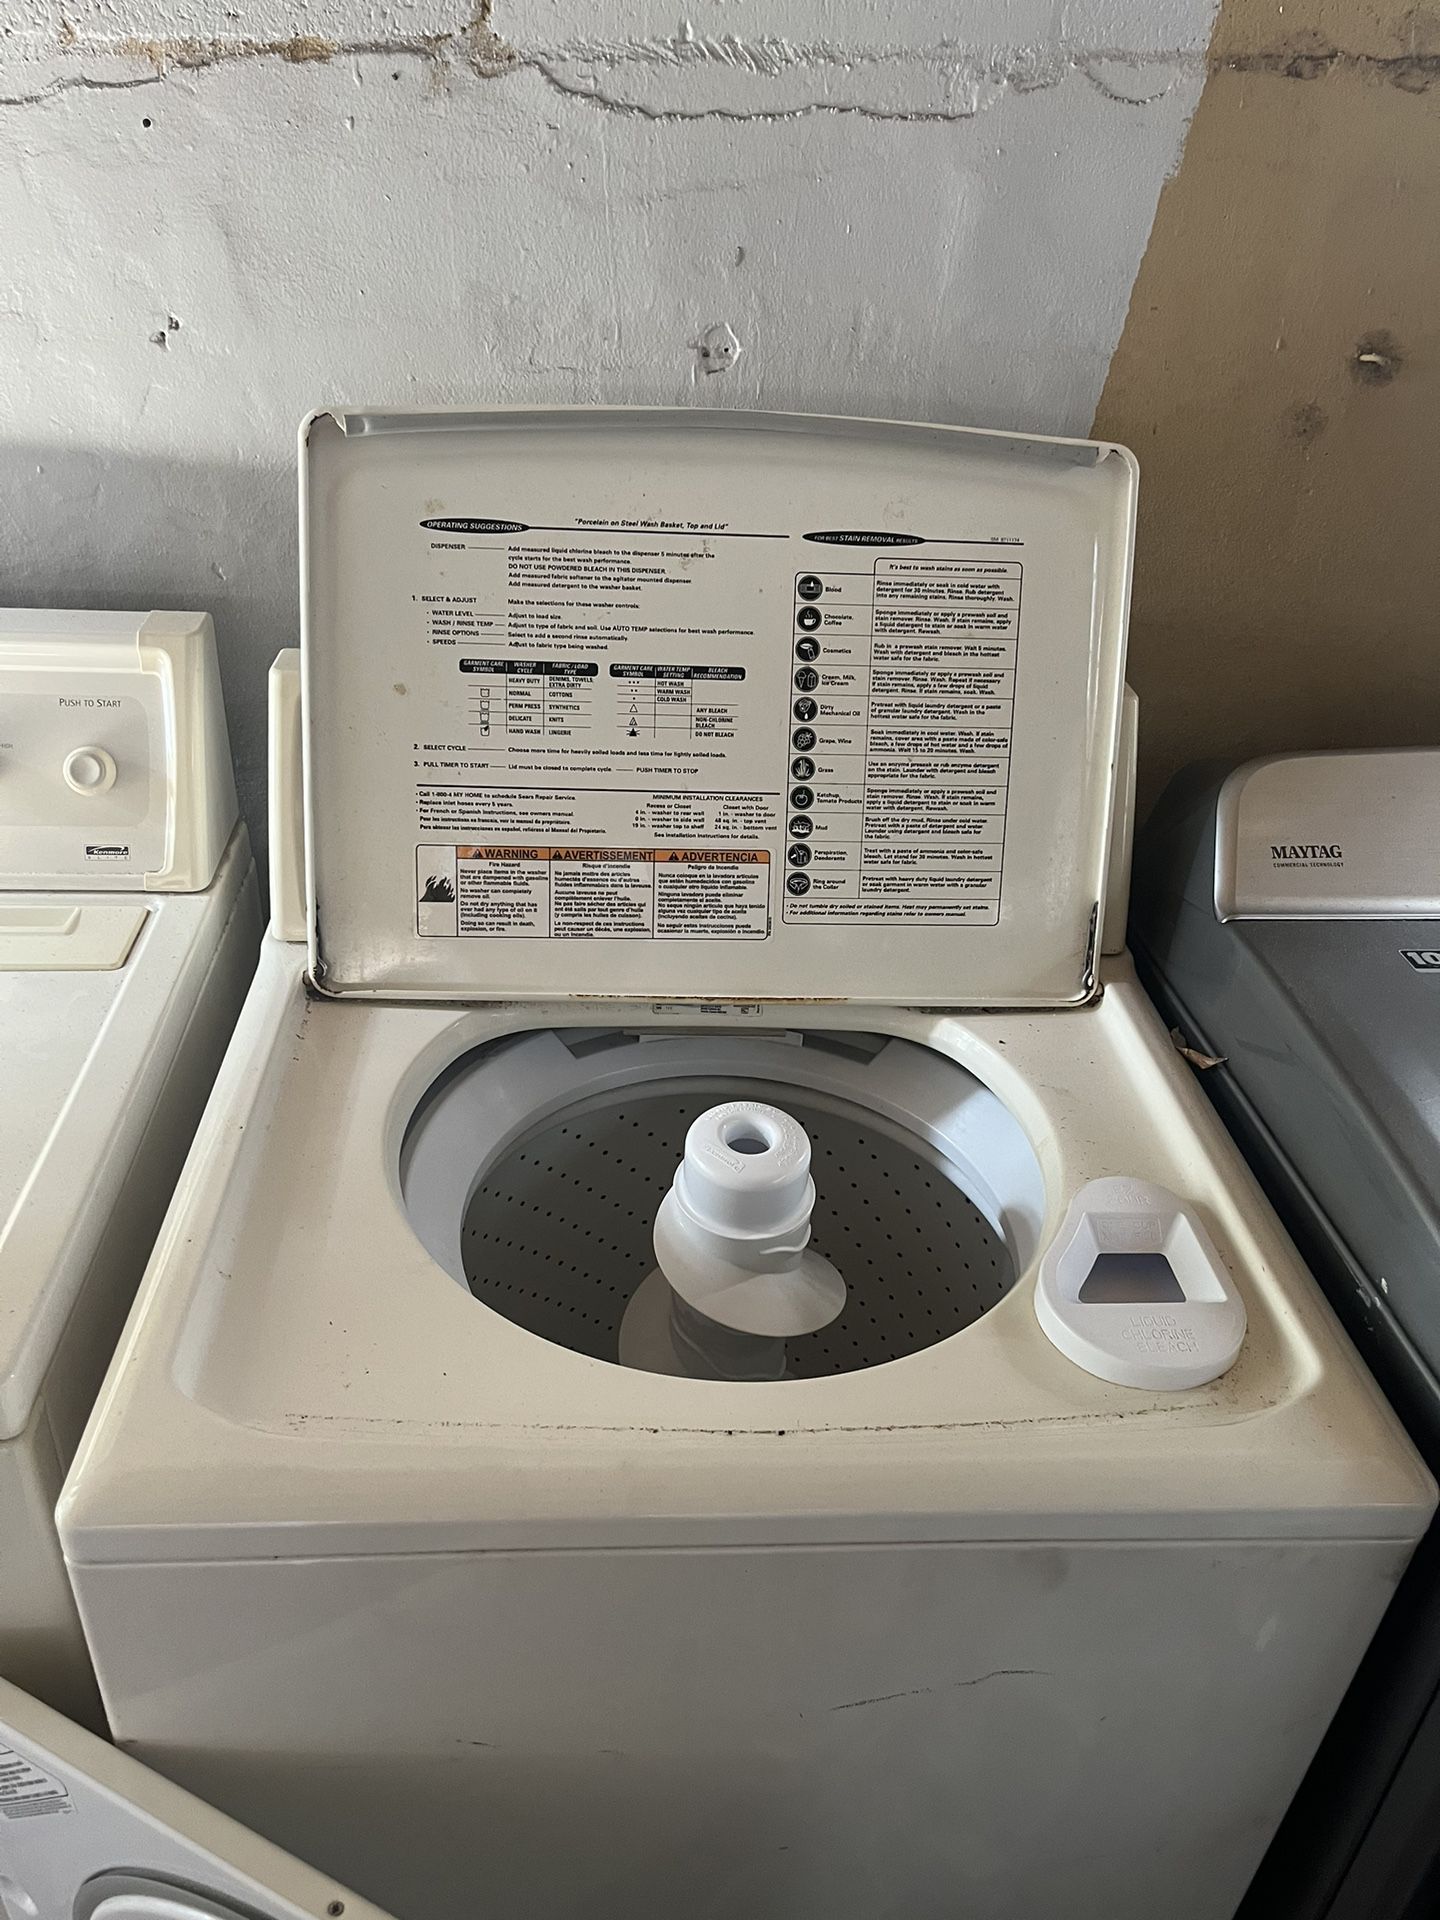 Kenmore, Old School Washer